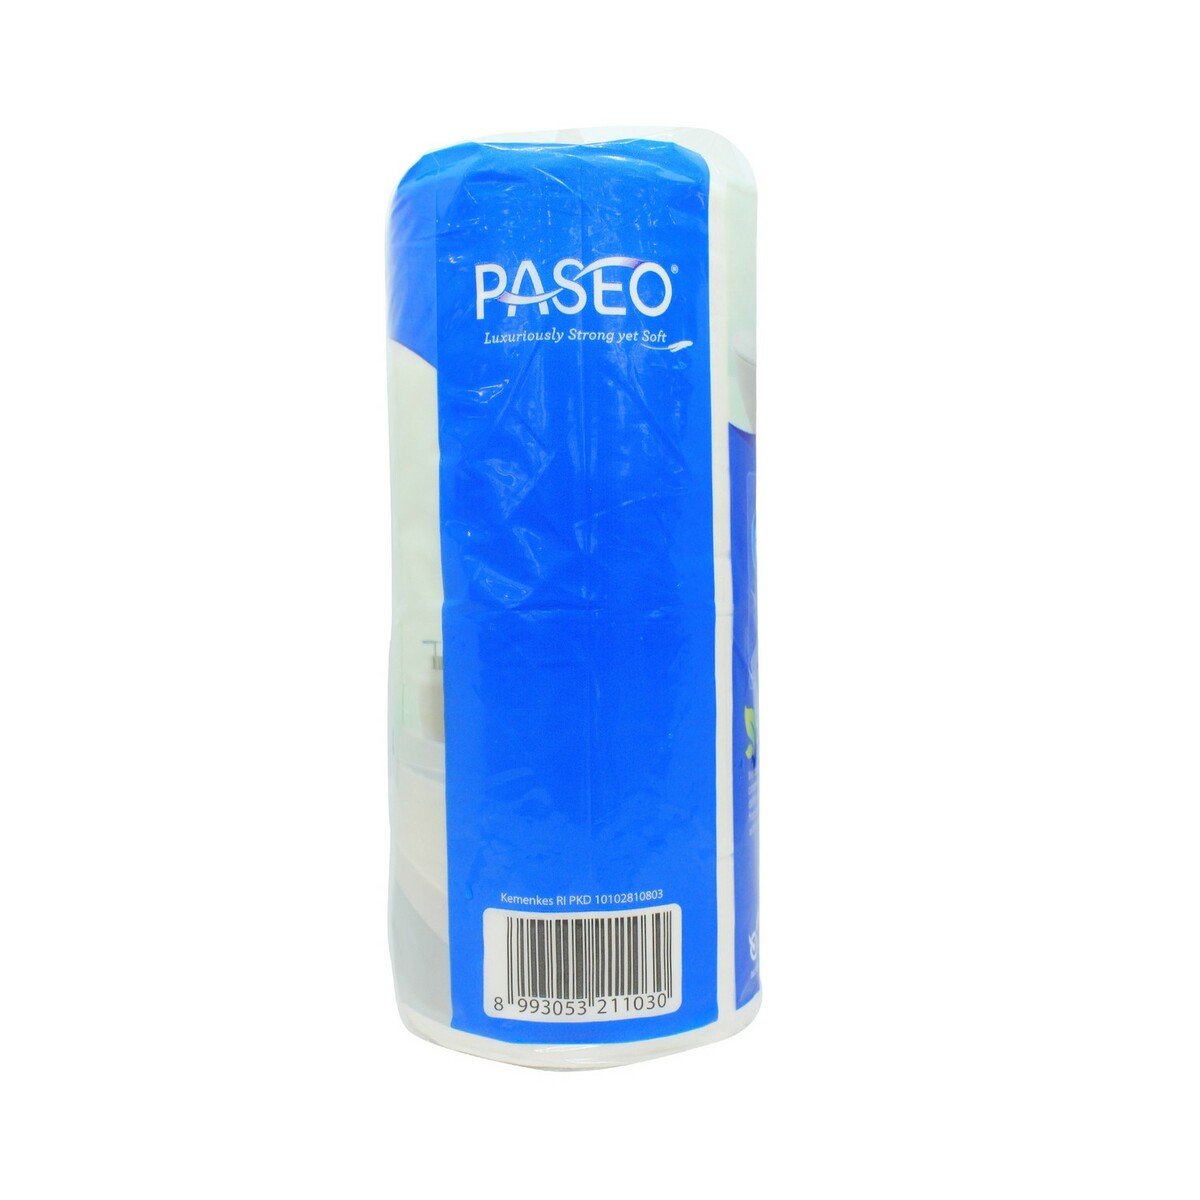 Paseo Toilet Tissue Non Emboss 2 Ply 6roll